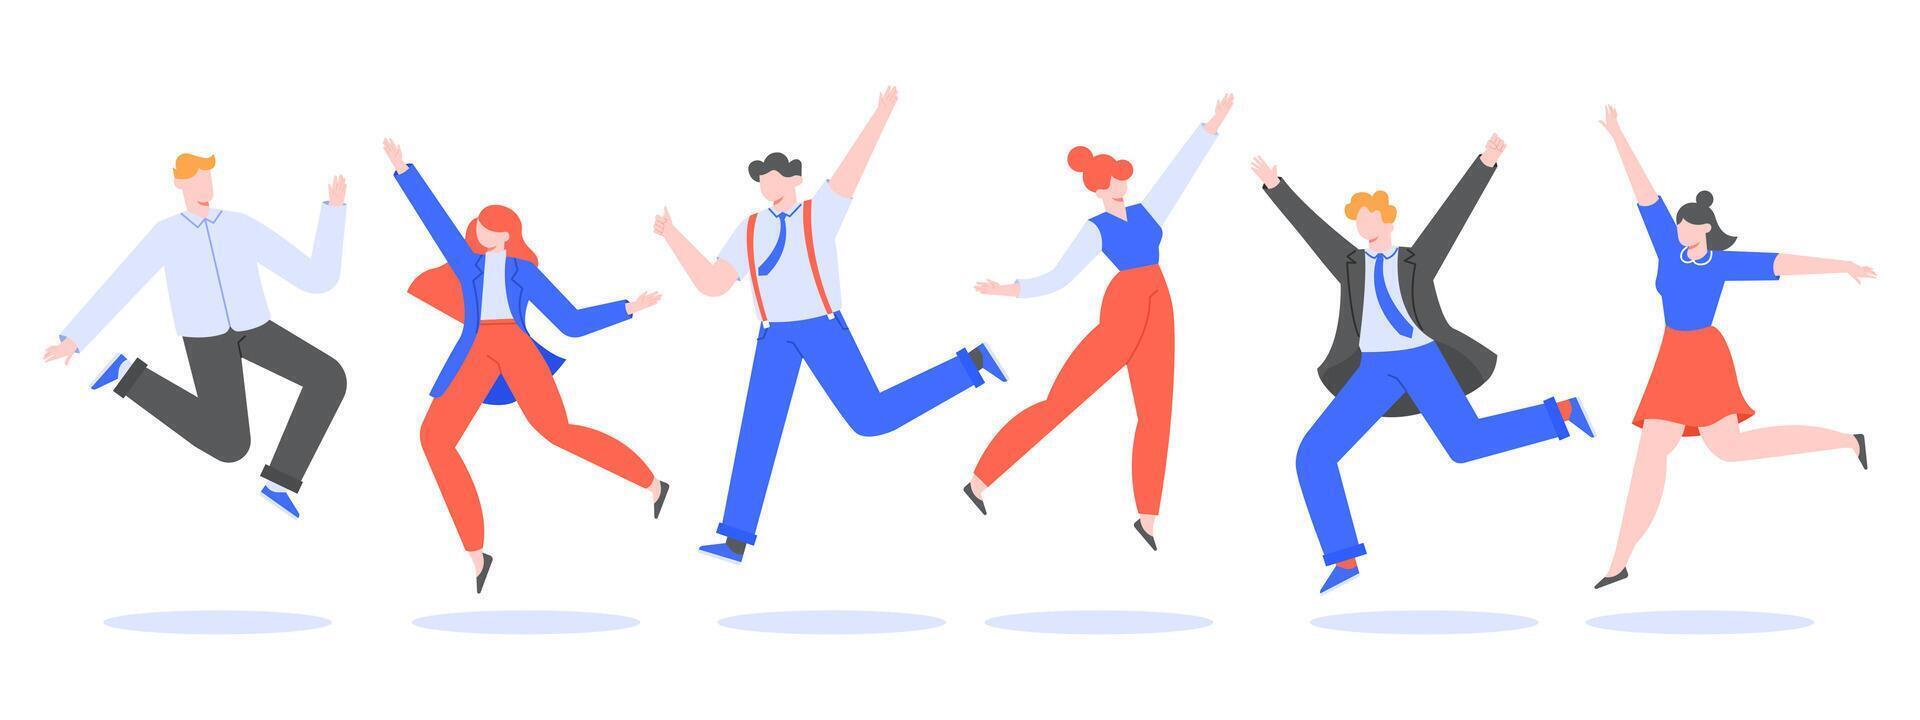 Happy jumping office team. Smiling people jumping at work winning party, business team celebration, corporate colleagues celebrate and joy together vector illustration. Coworkers flat character